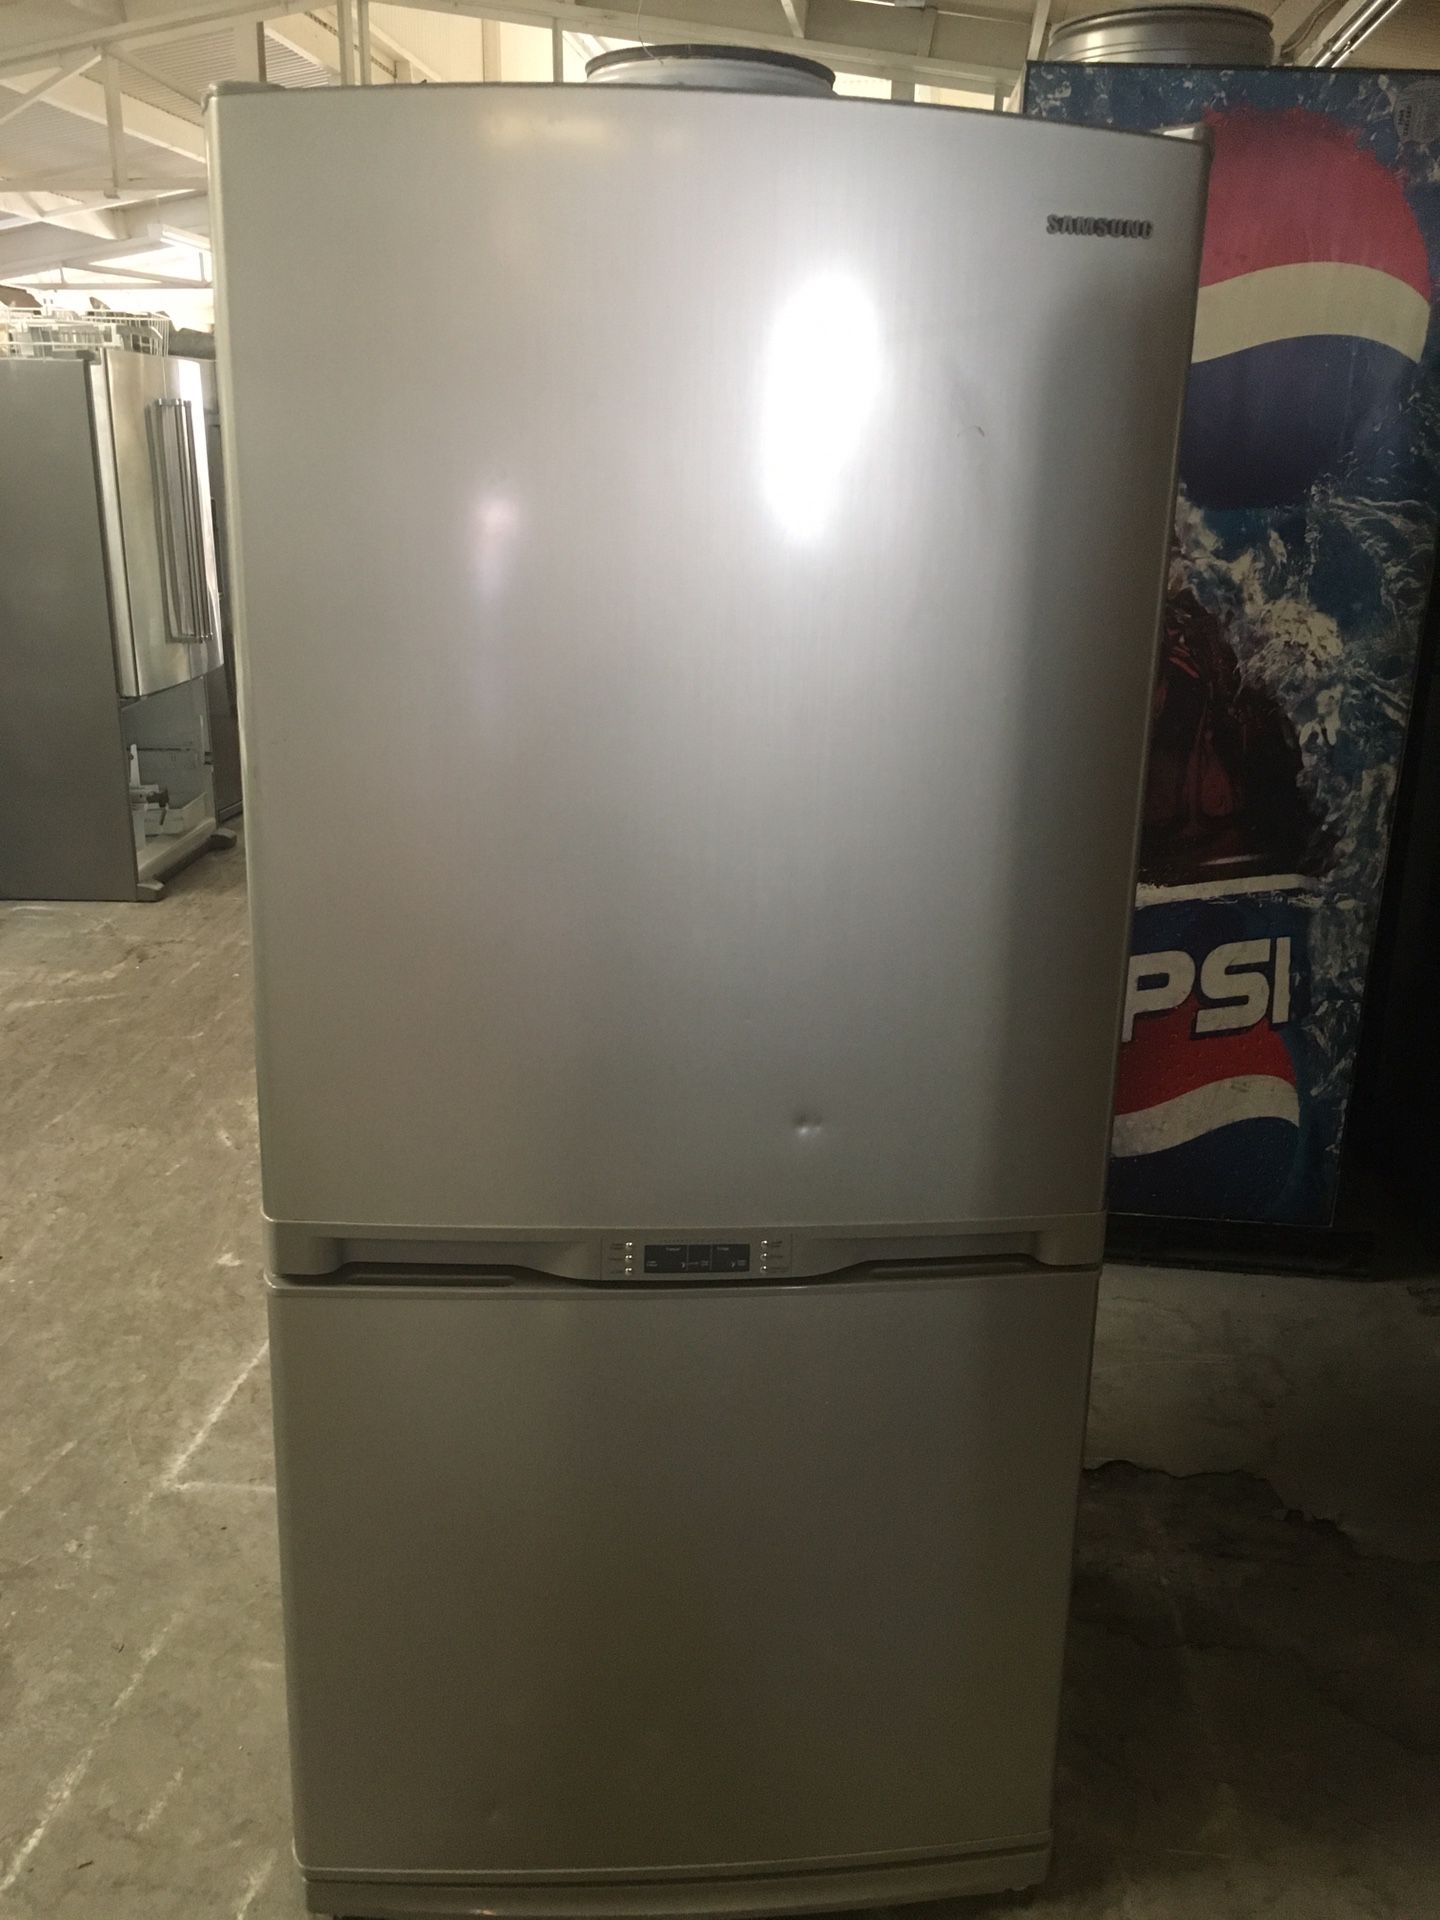 Refrigerator brand Samsung everything is good working condition 90 days warranty delivery and installation